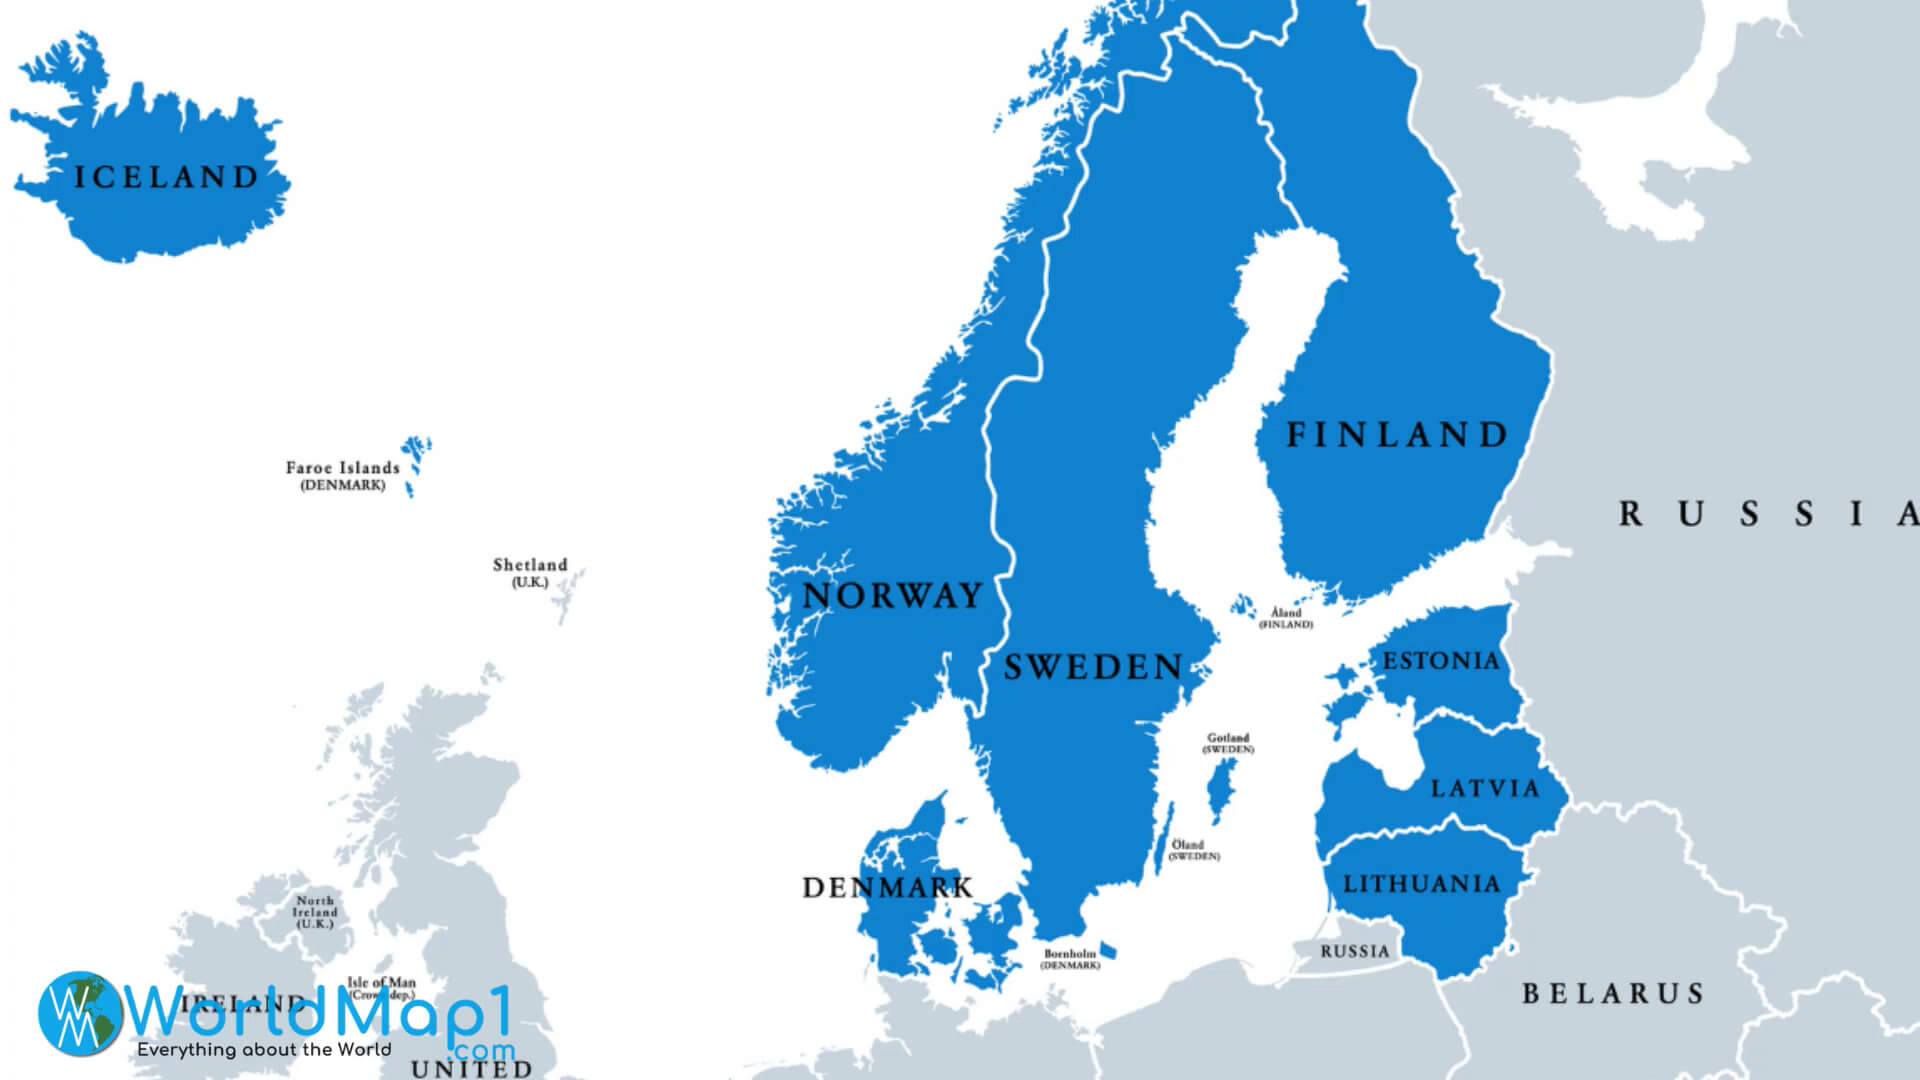 Scandinavian and Baltic Countries Map with Russia